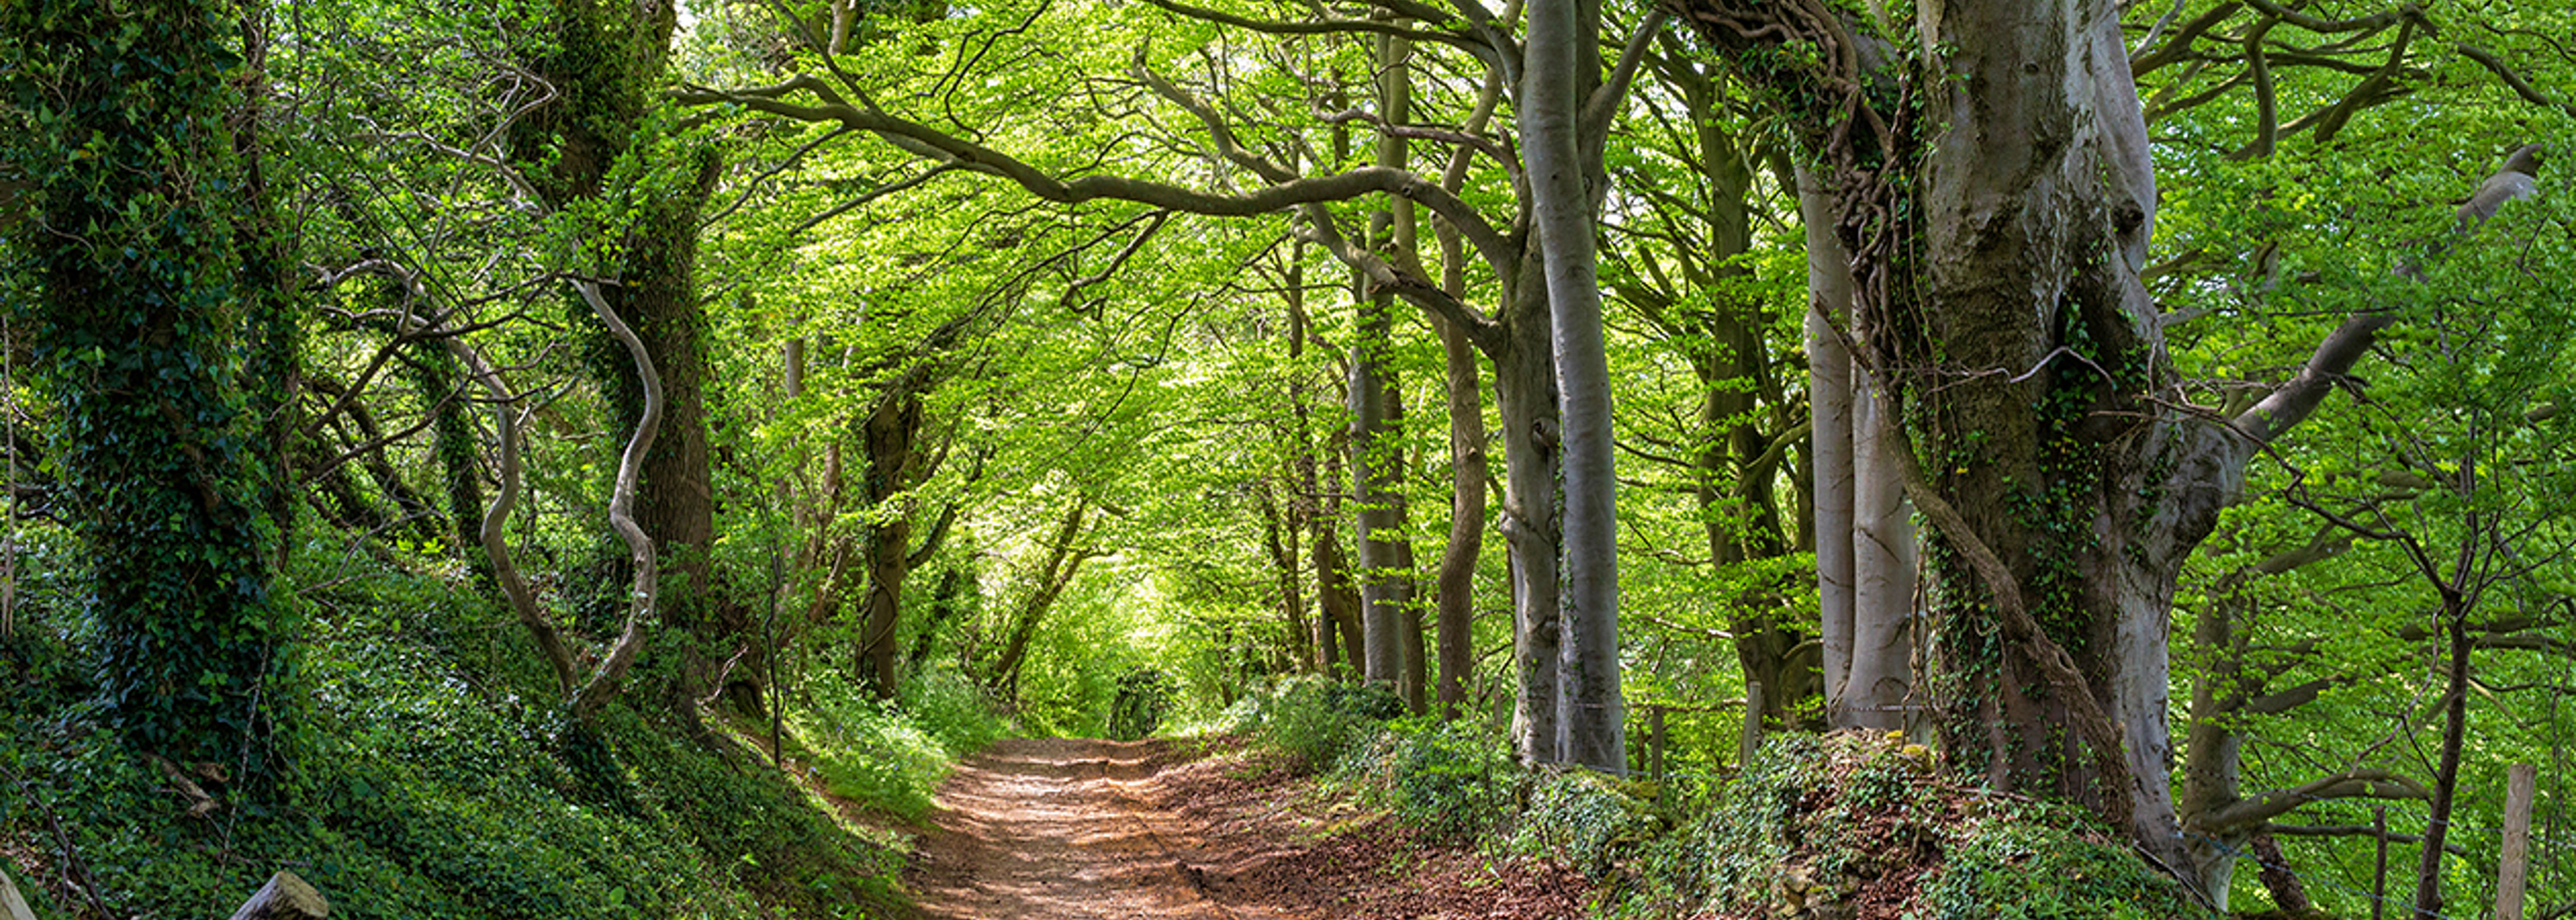 Councils are failing to protect ancient woods, says Woodland Trust